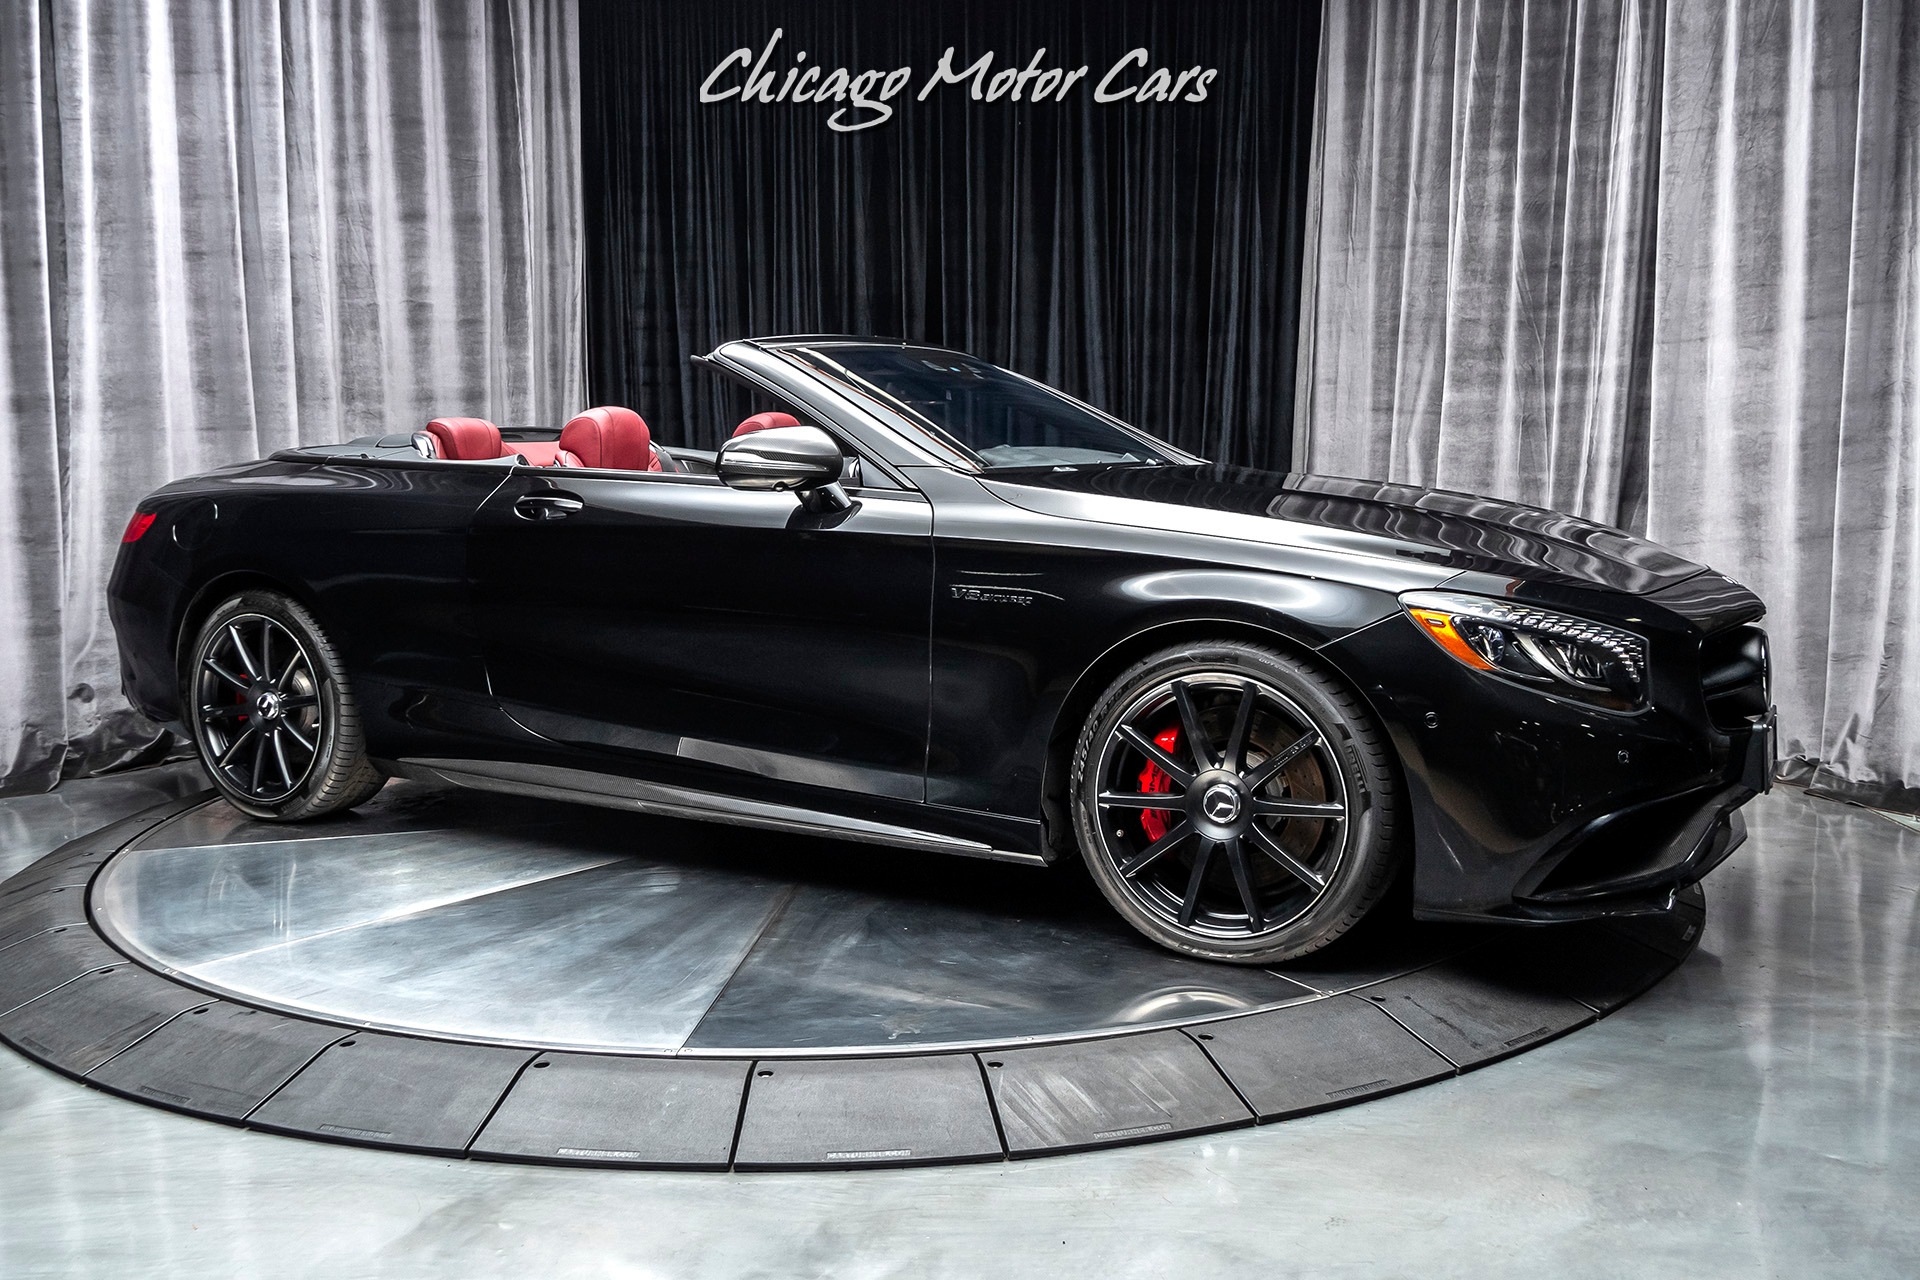 Used 2017 Mercedes-Benz S63 AMG Convertible For Sale ...